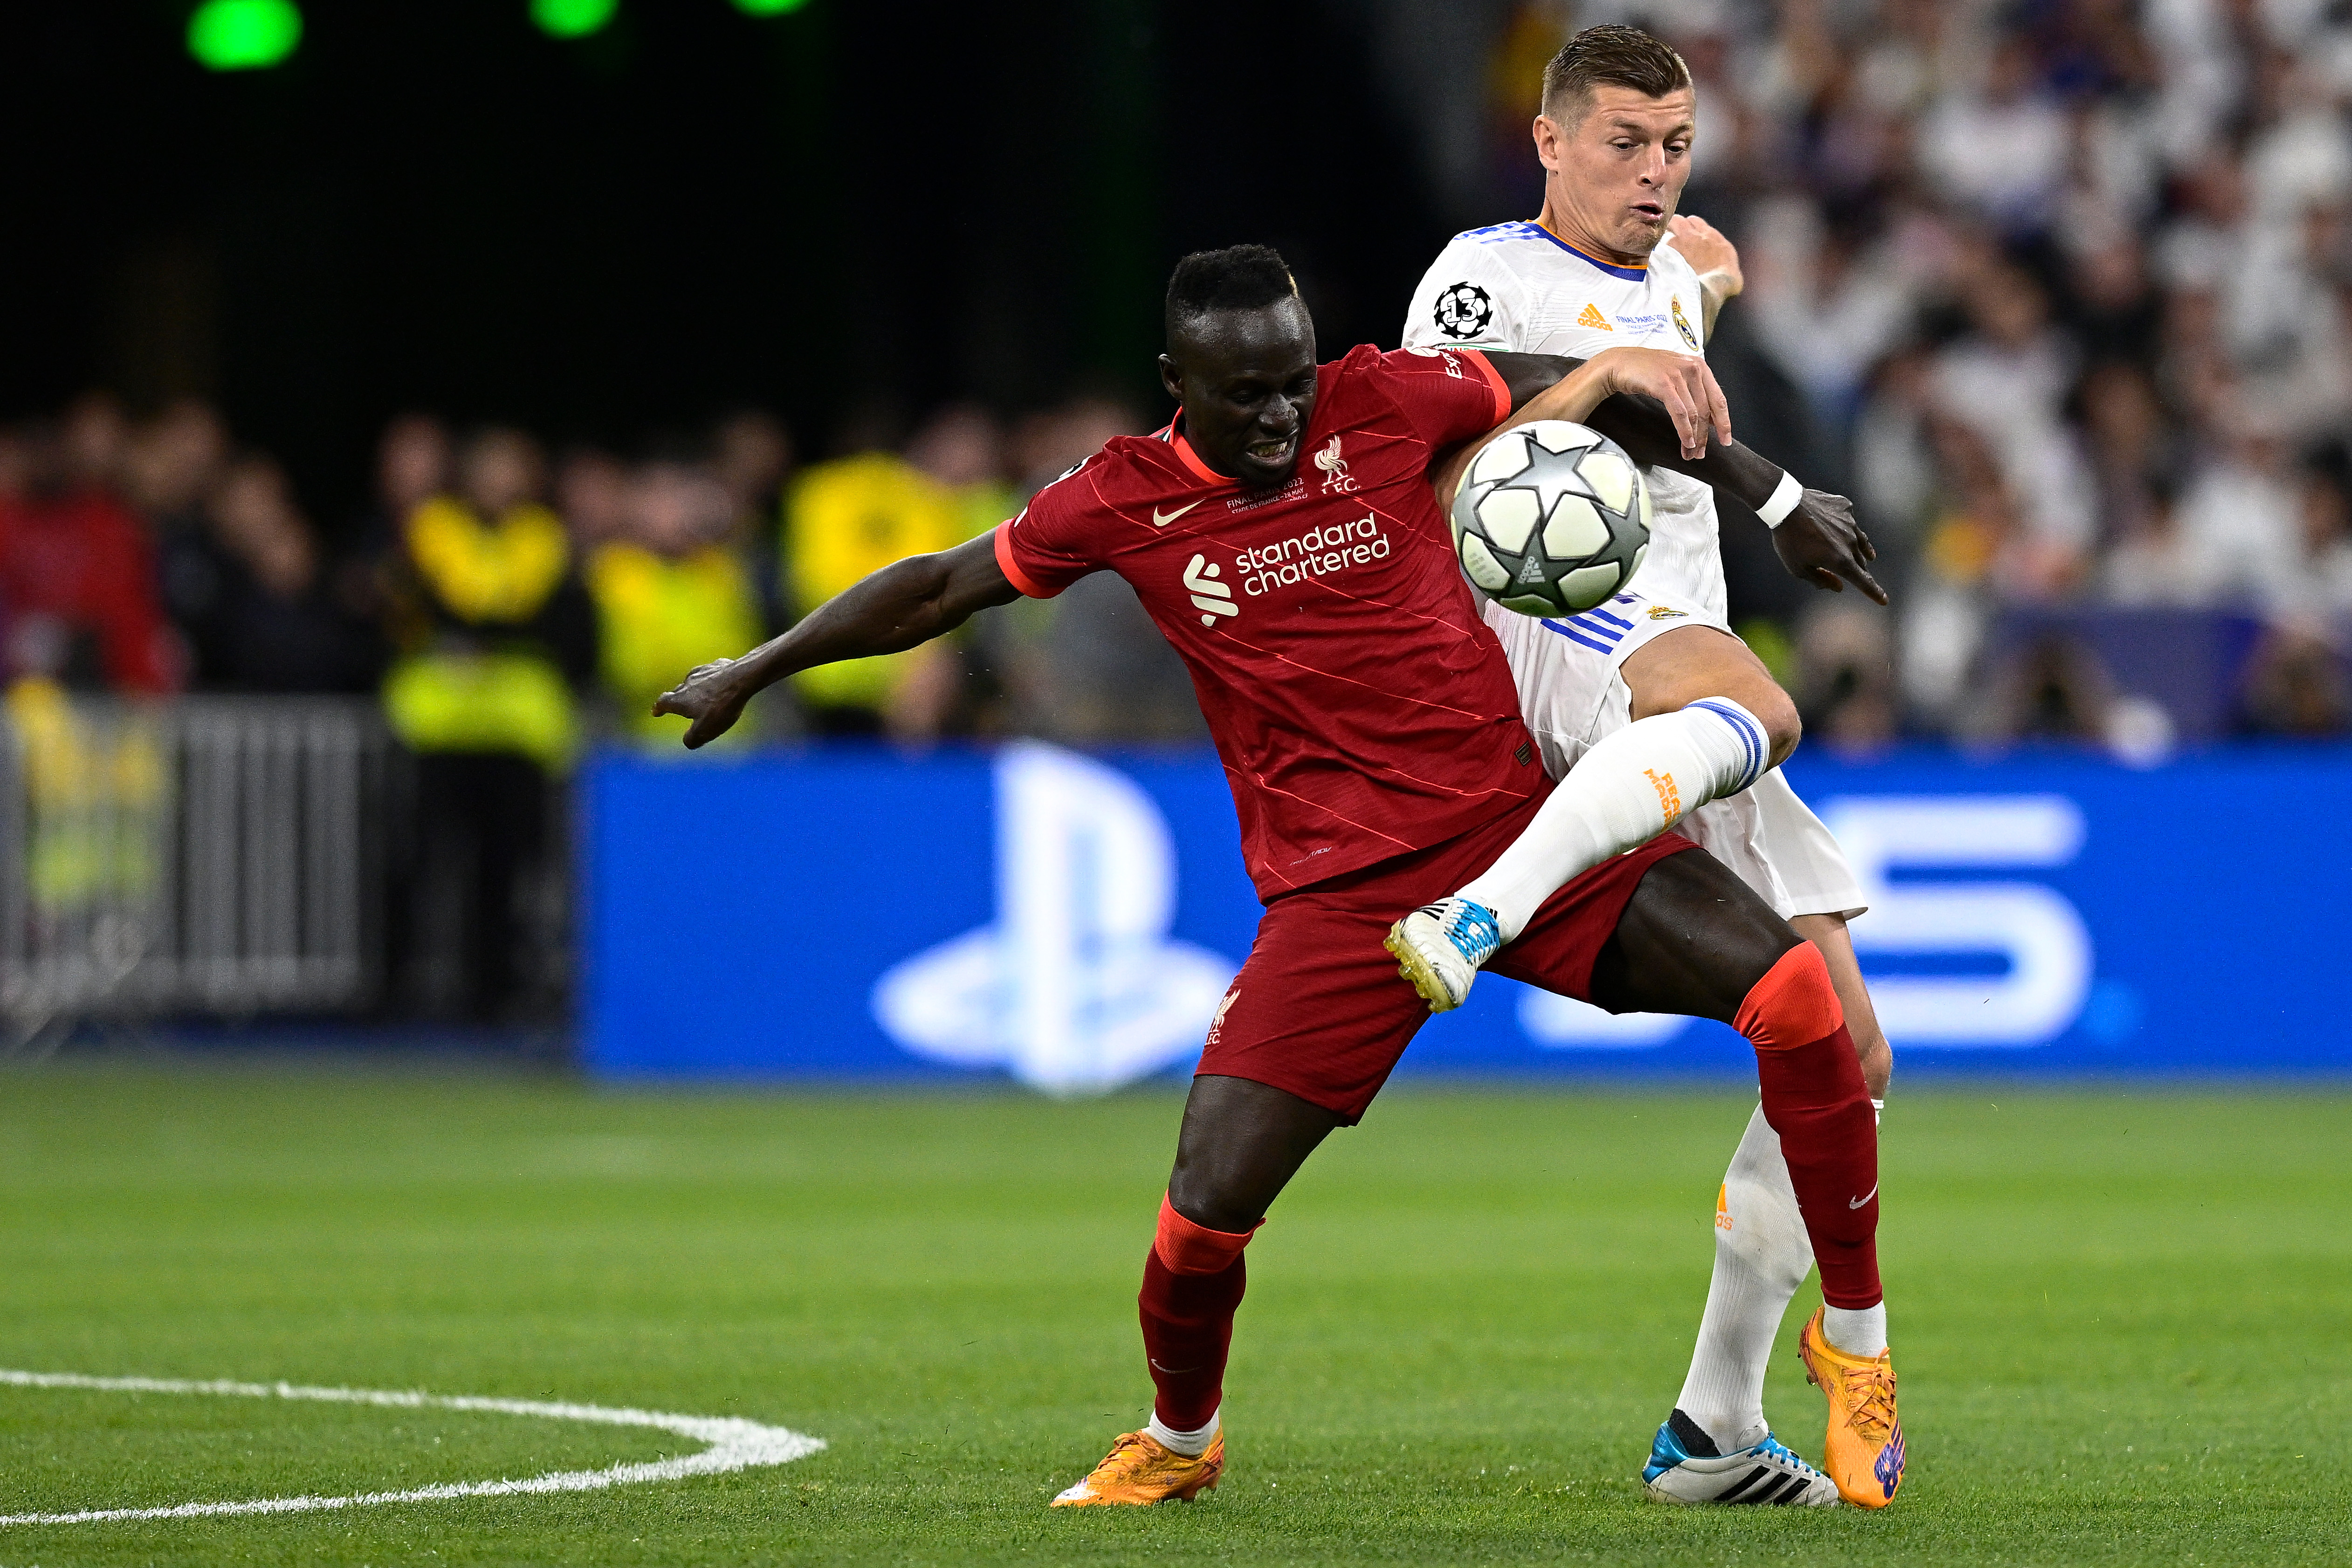 Sadio Mané of Liverpool FC and Toni Kroos of Real Madrid CF battle for the ball during the UEFA Champions League final between Liverpool FC and Real Madrid at Stade de France on May 28, 2022 in Paris, France.